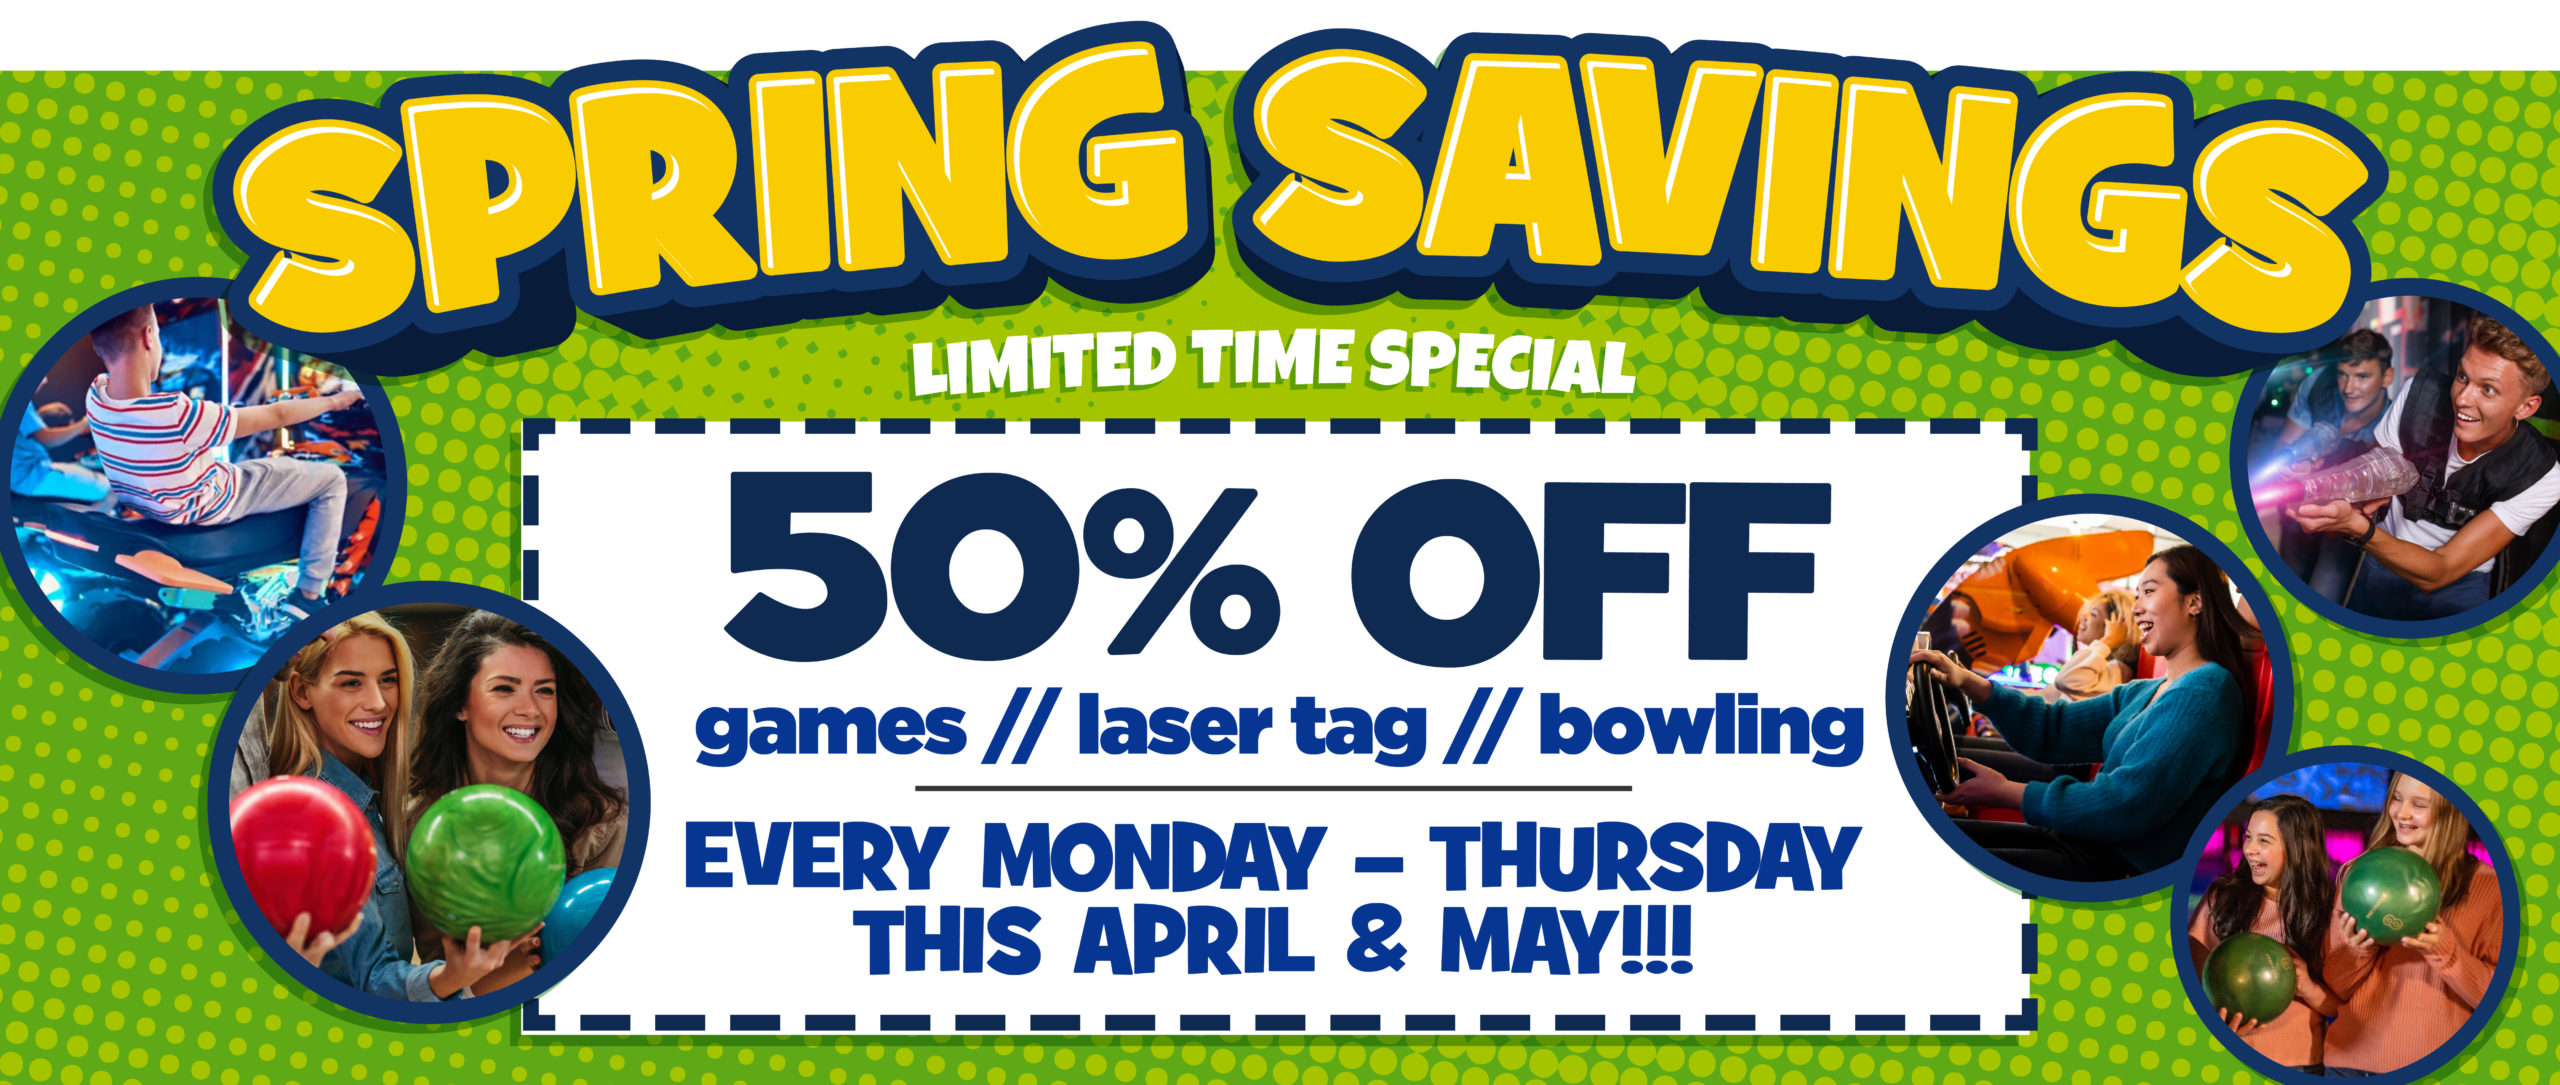 Spring Savings Limited Time Offer - 50% Off games / laser tag / bowling. Every Monday-Thursday this April & May!!!